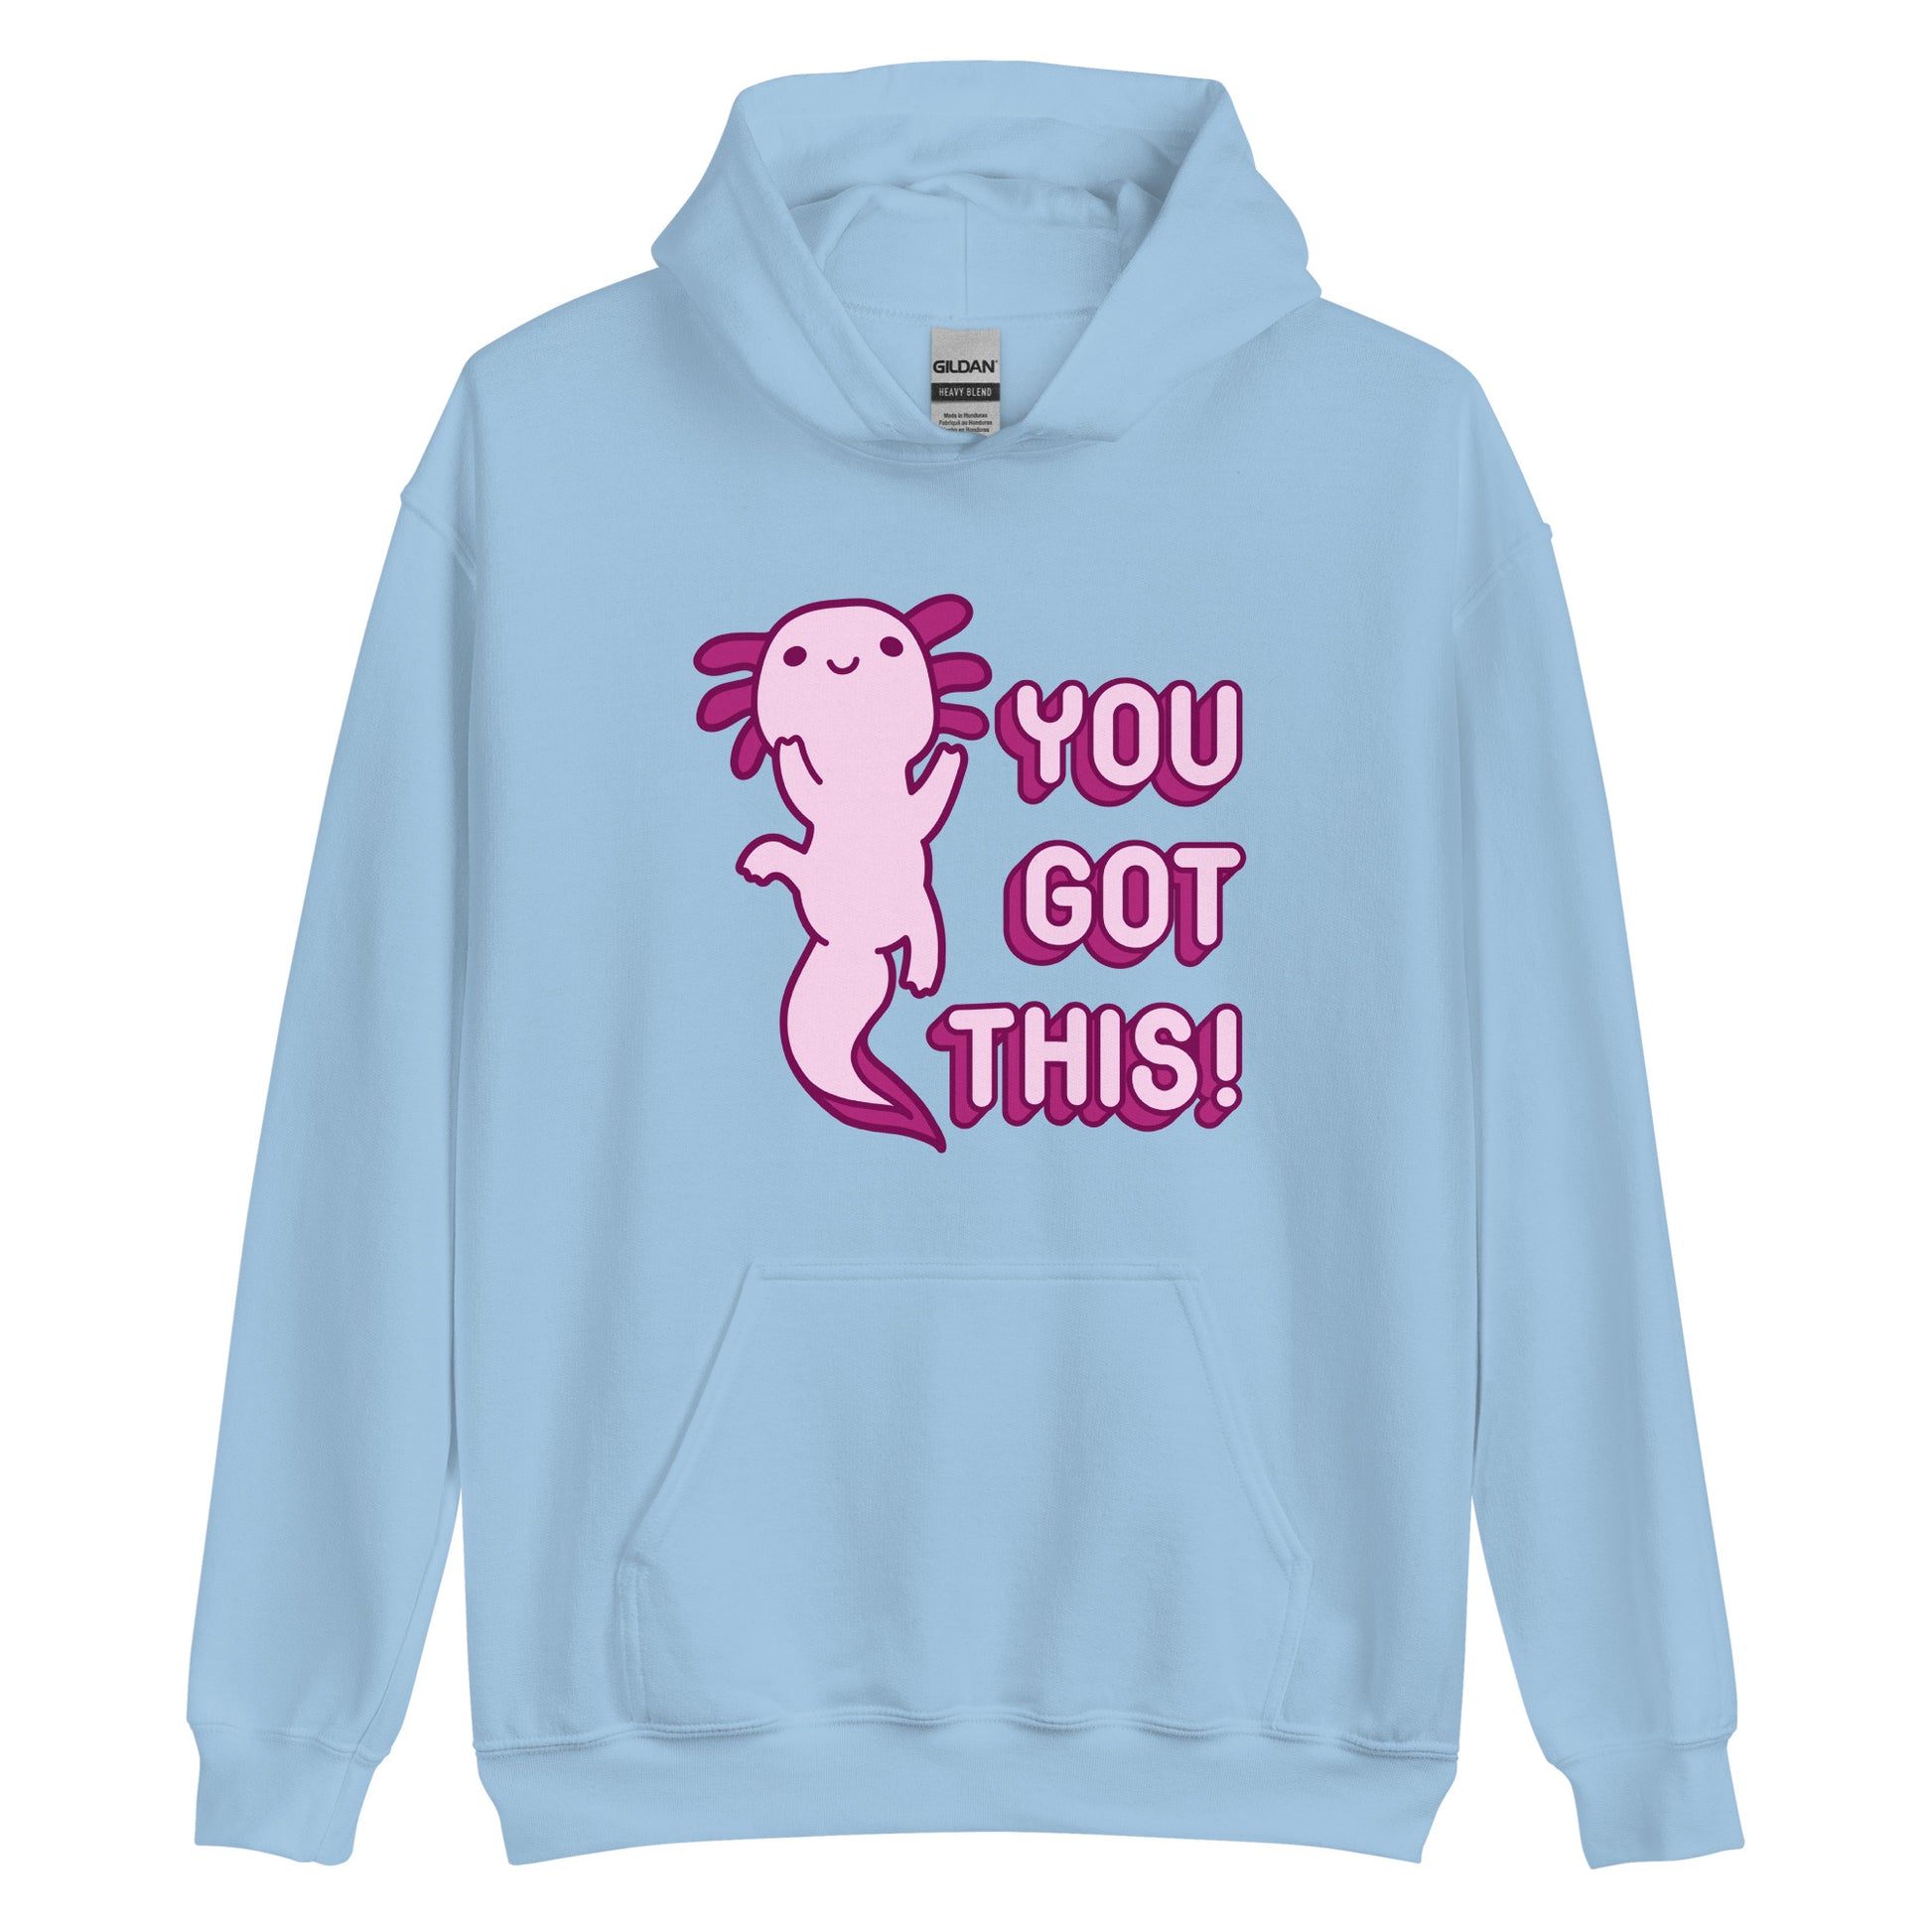 A light blue hooded sweatshirt with front pouch pocket featuring a picture of a pink axolotl and text reading "You Got This!" in pink bubble letters